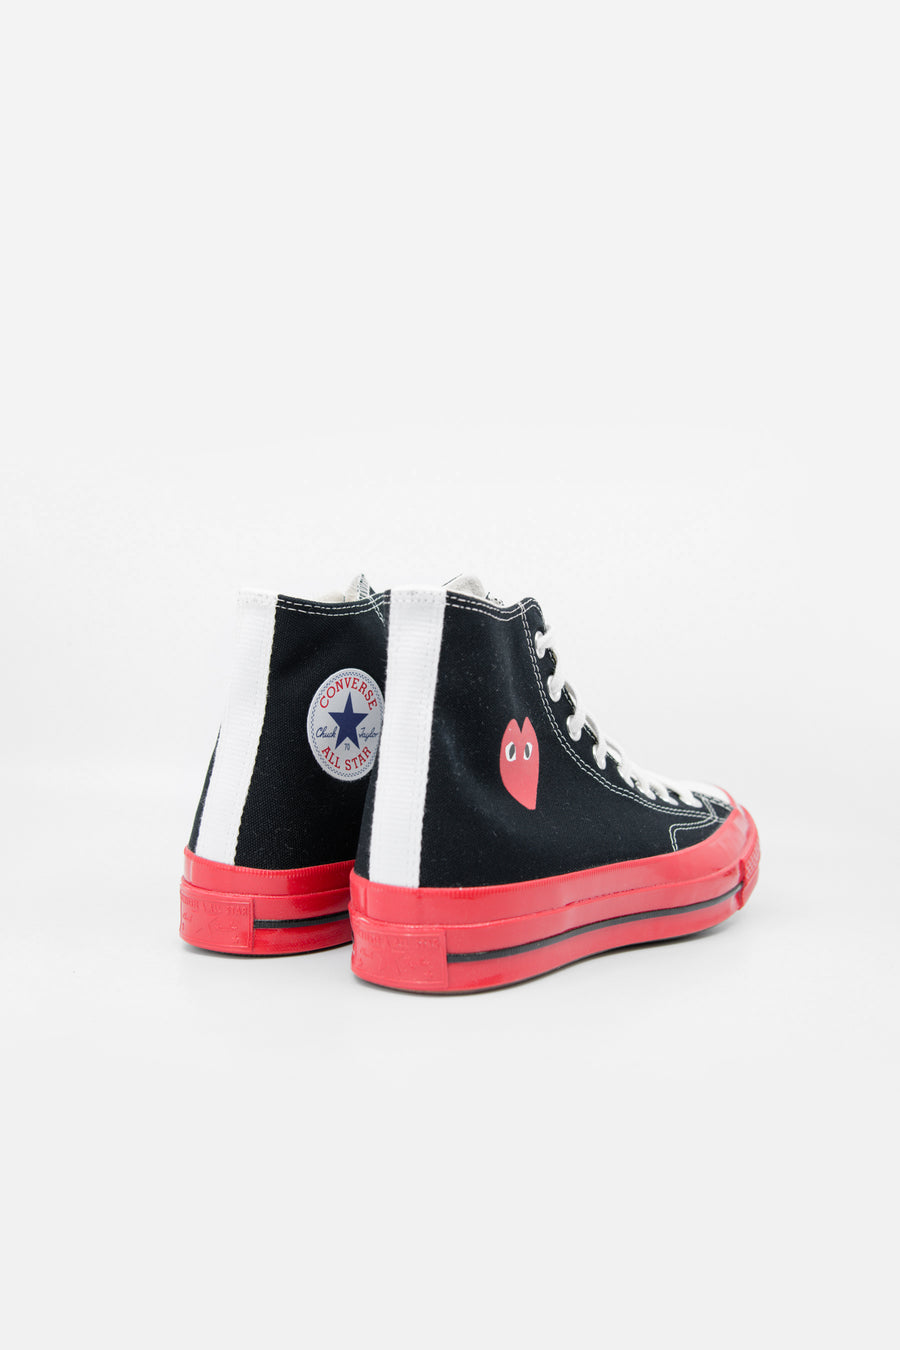 PLAY Red Sole Chuck Taylor High Black K124-001-1